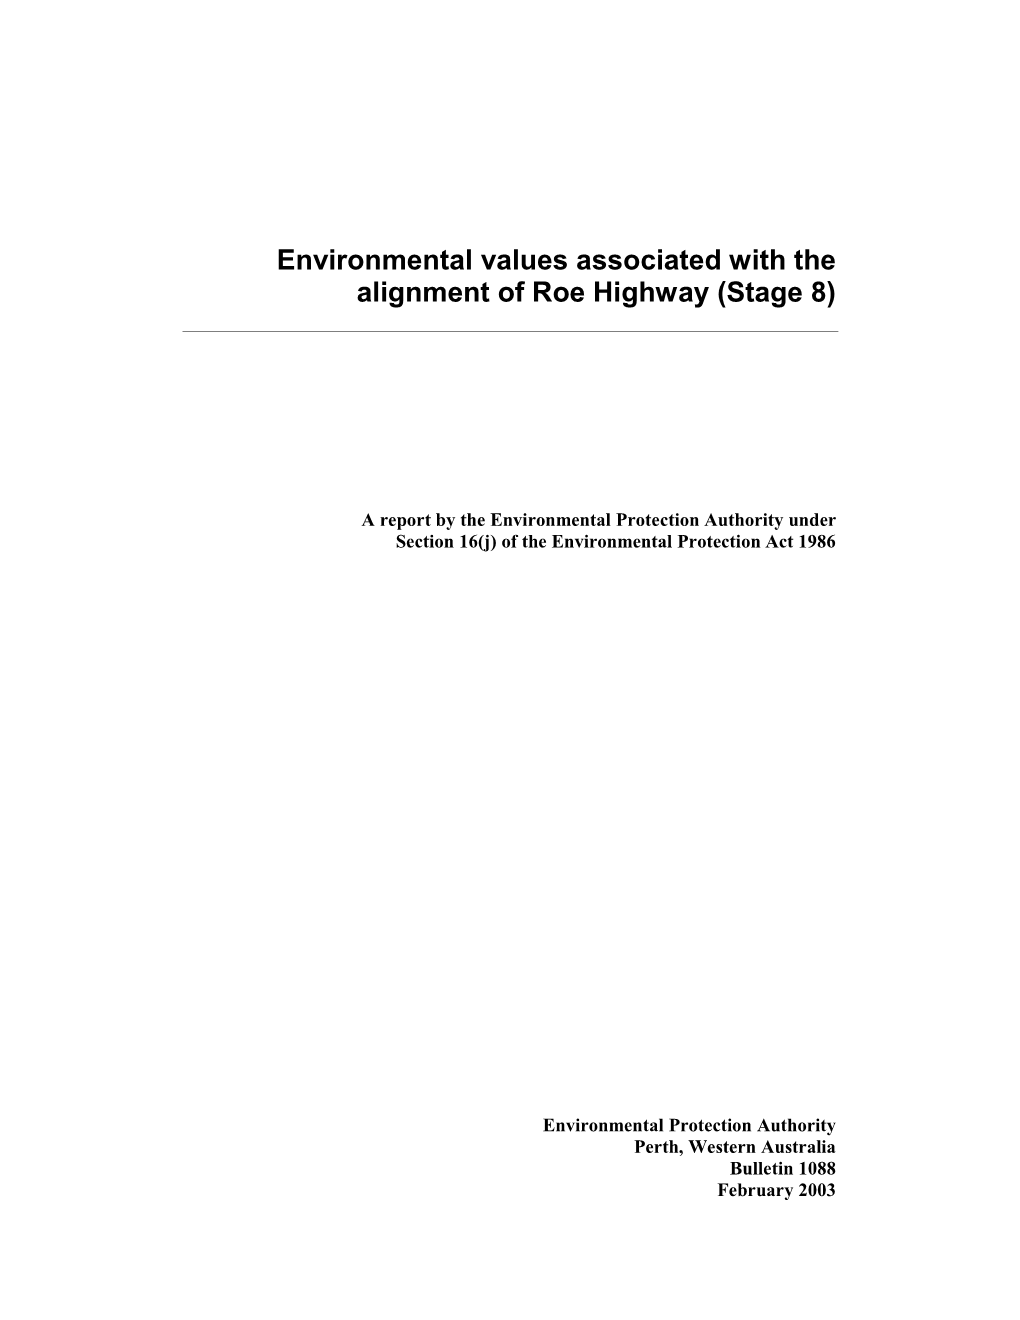 Environmental Values Associated with the Alignment of Roe Highway (Stage 8)